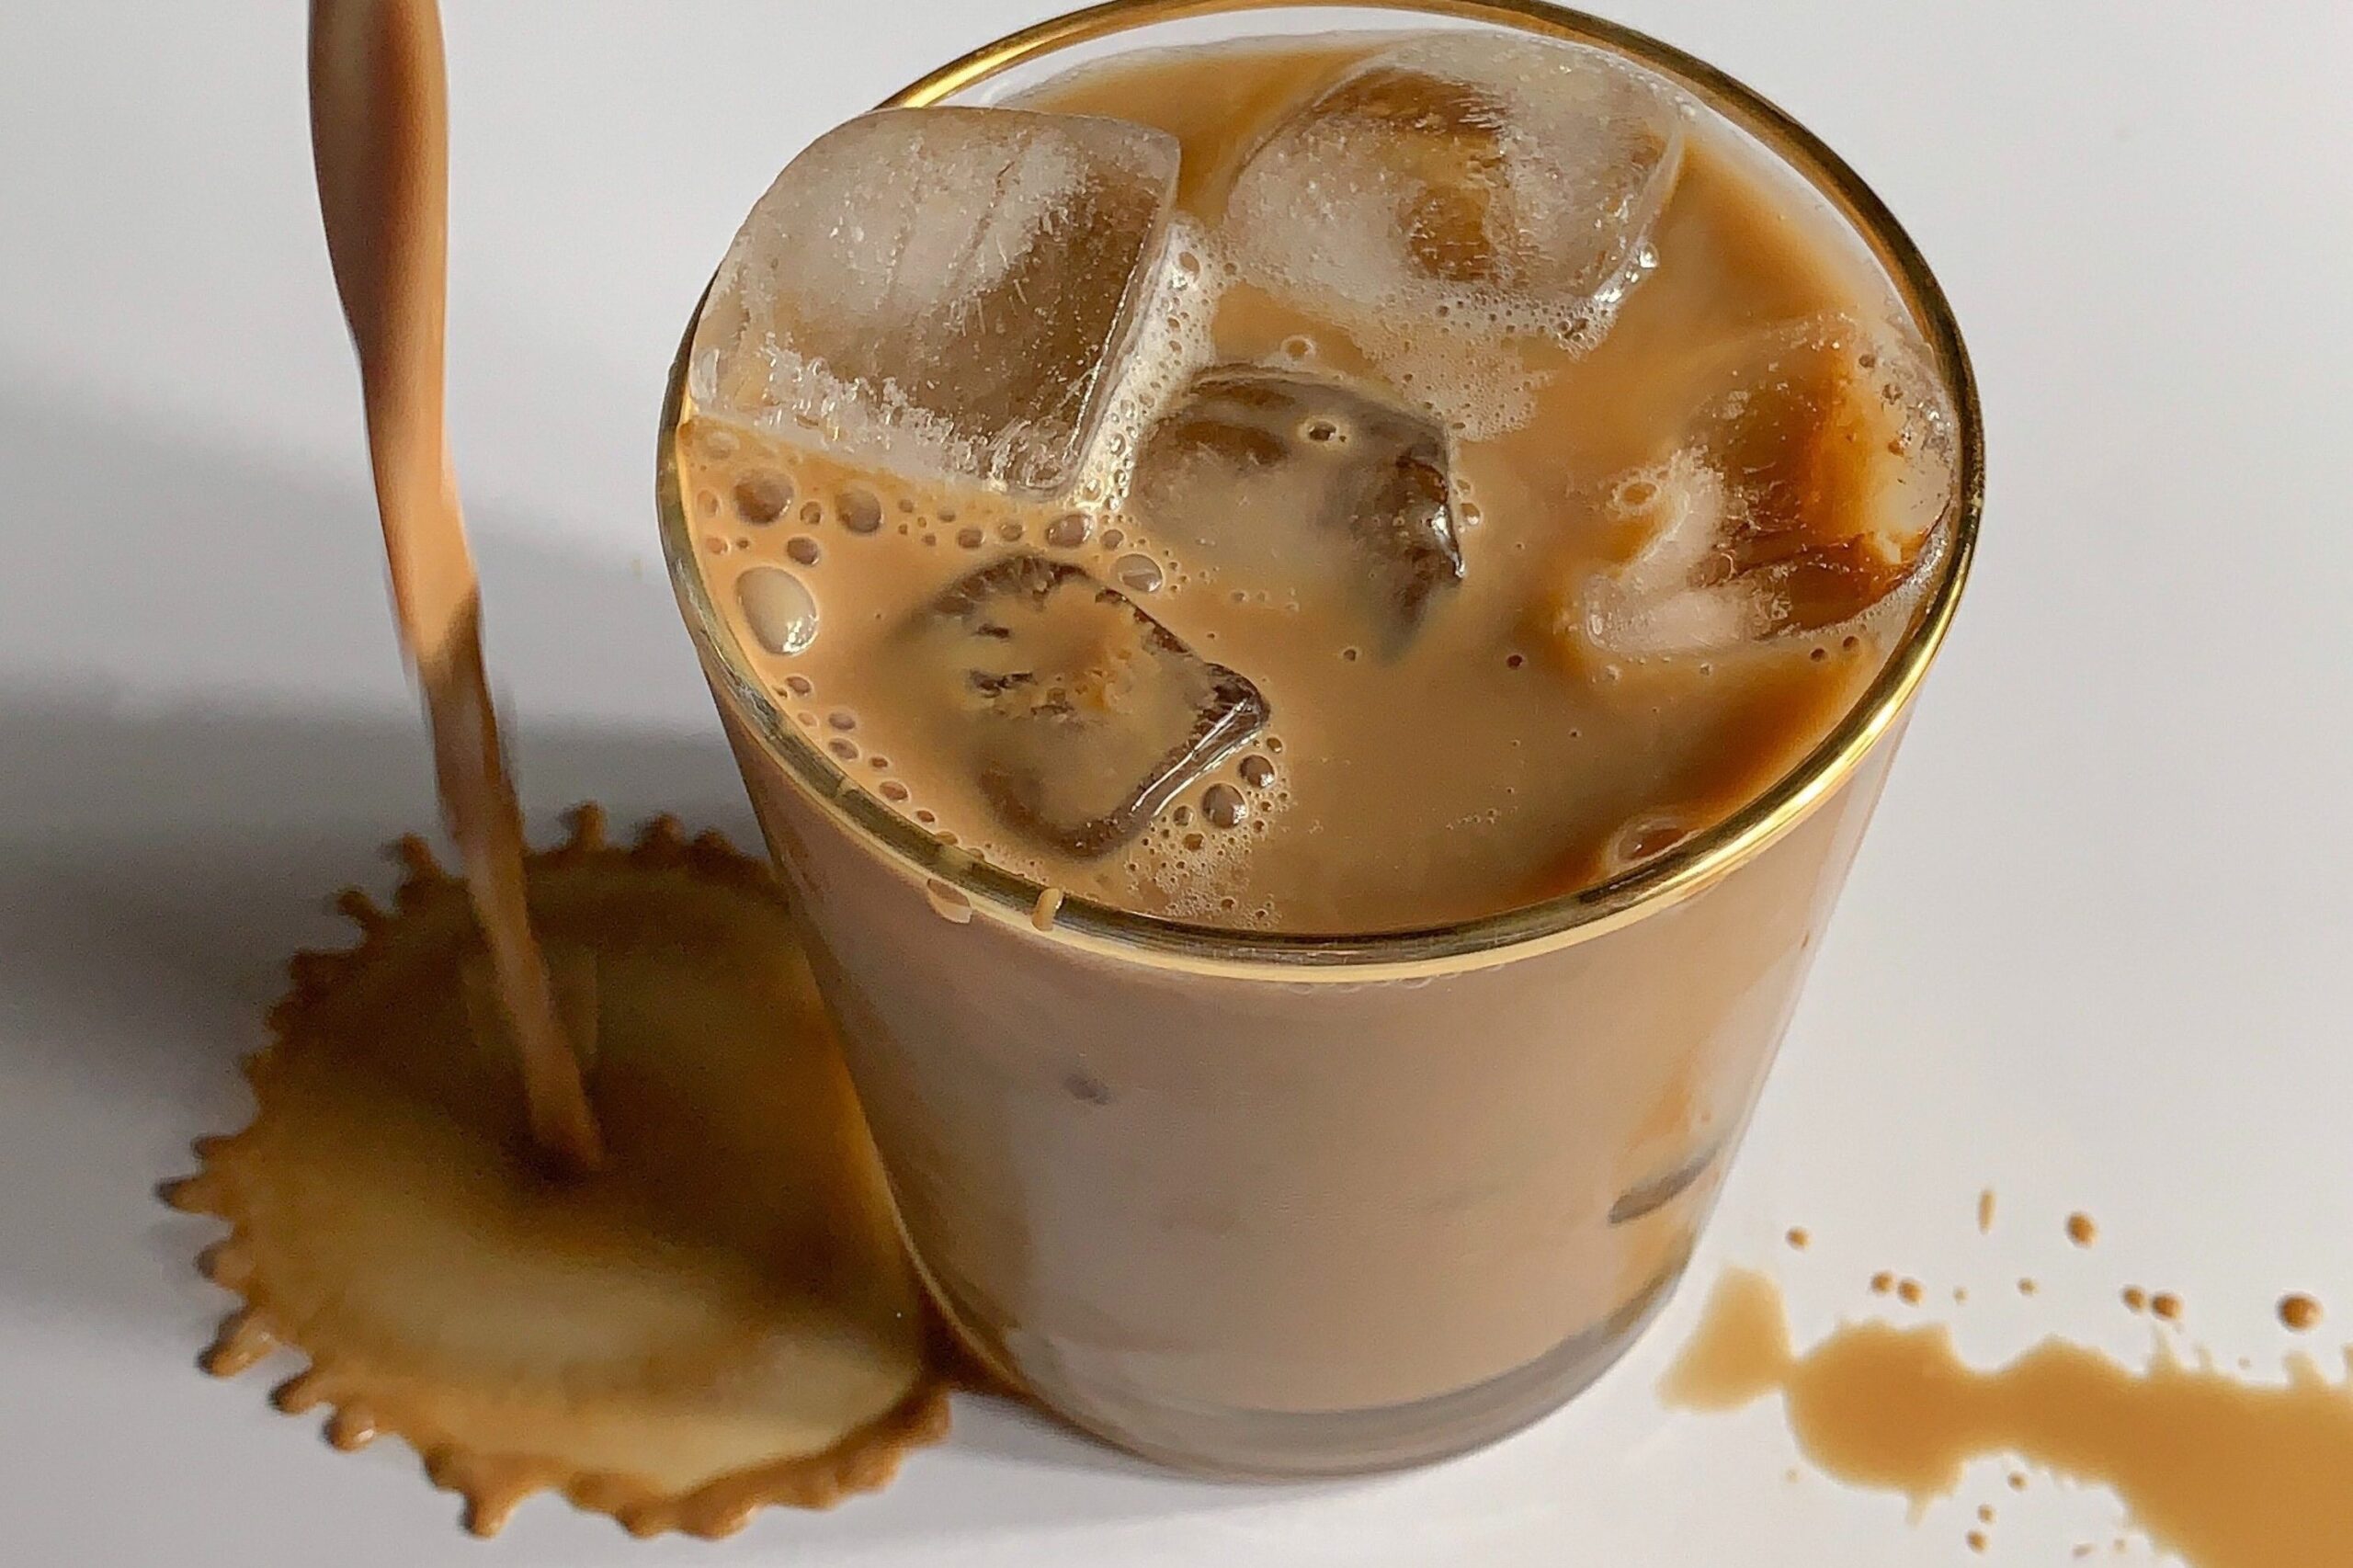 Iced coffee over-pour.